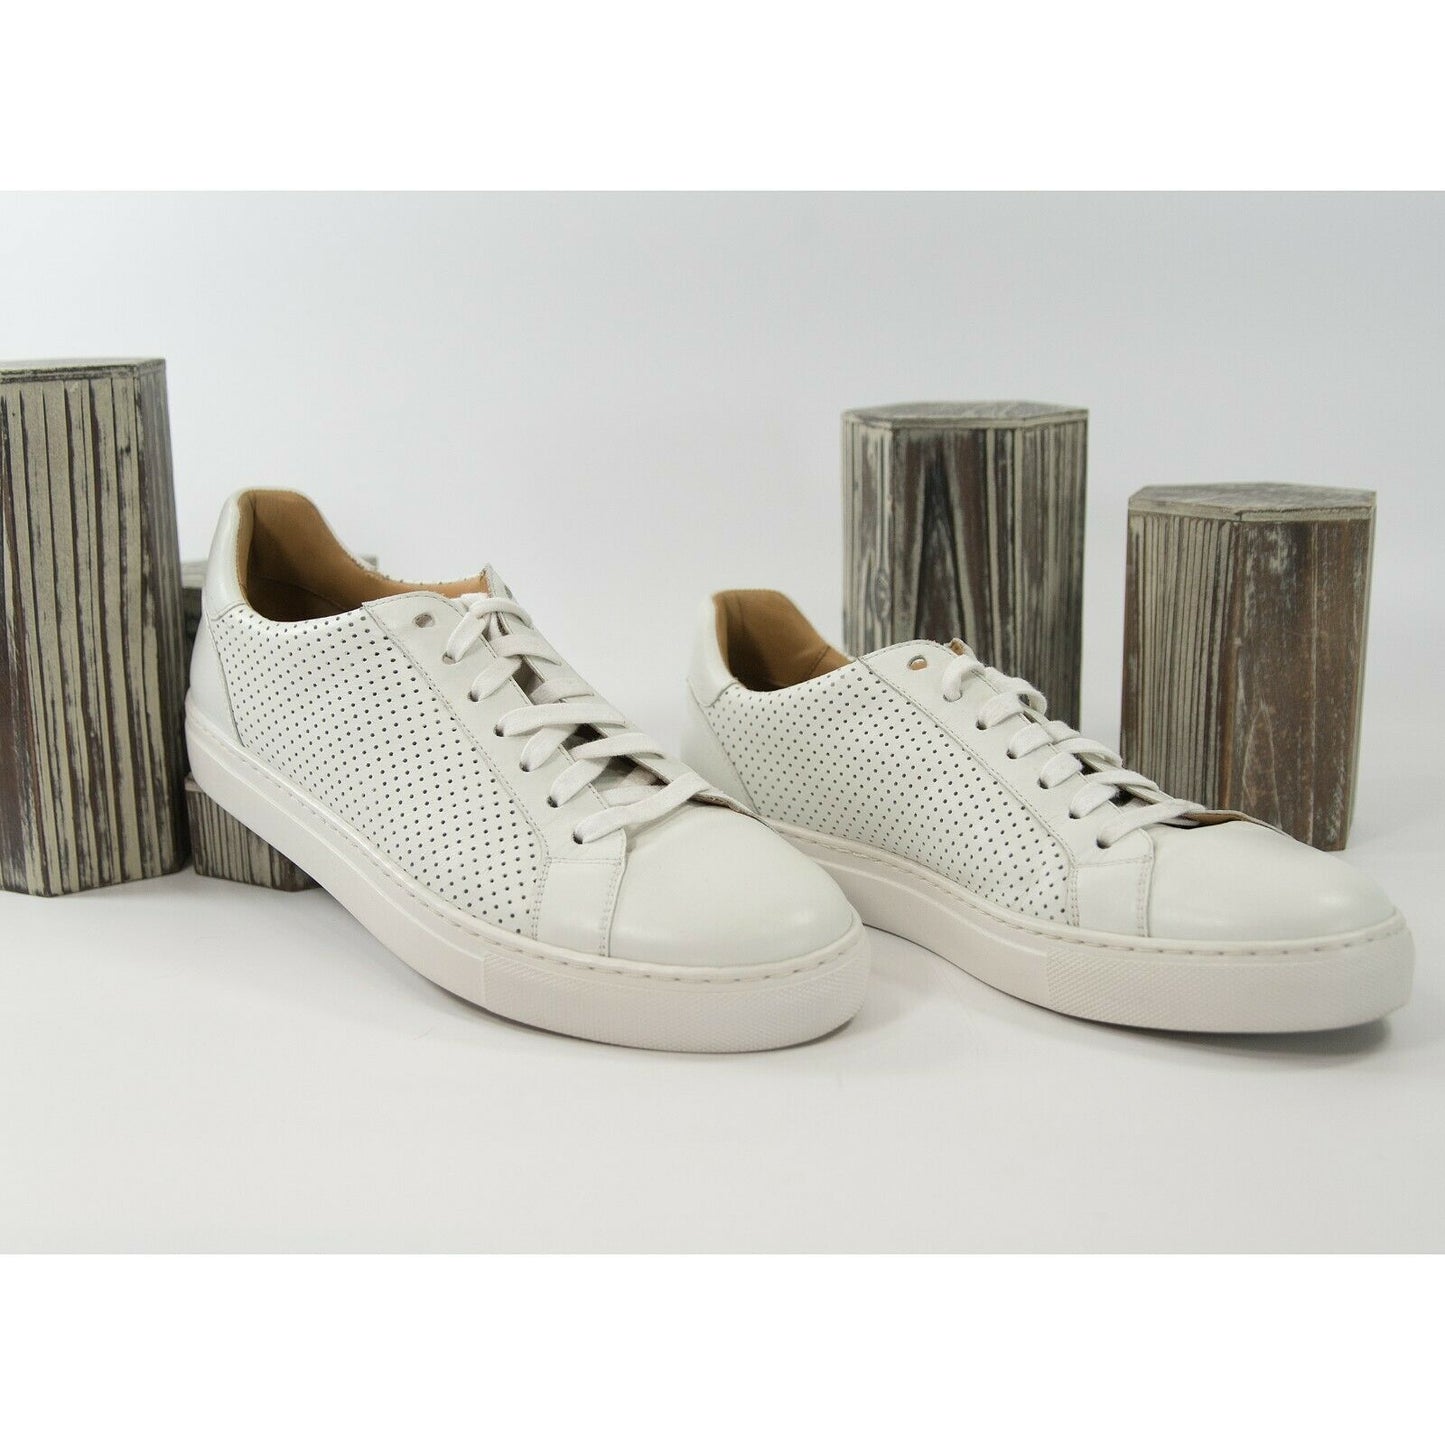 Magnanni White Perforated Leather Lace Up Sneakers Size 8